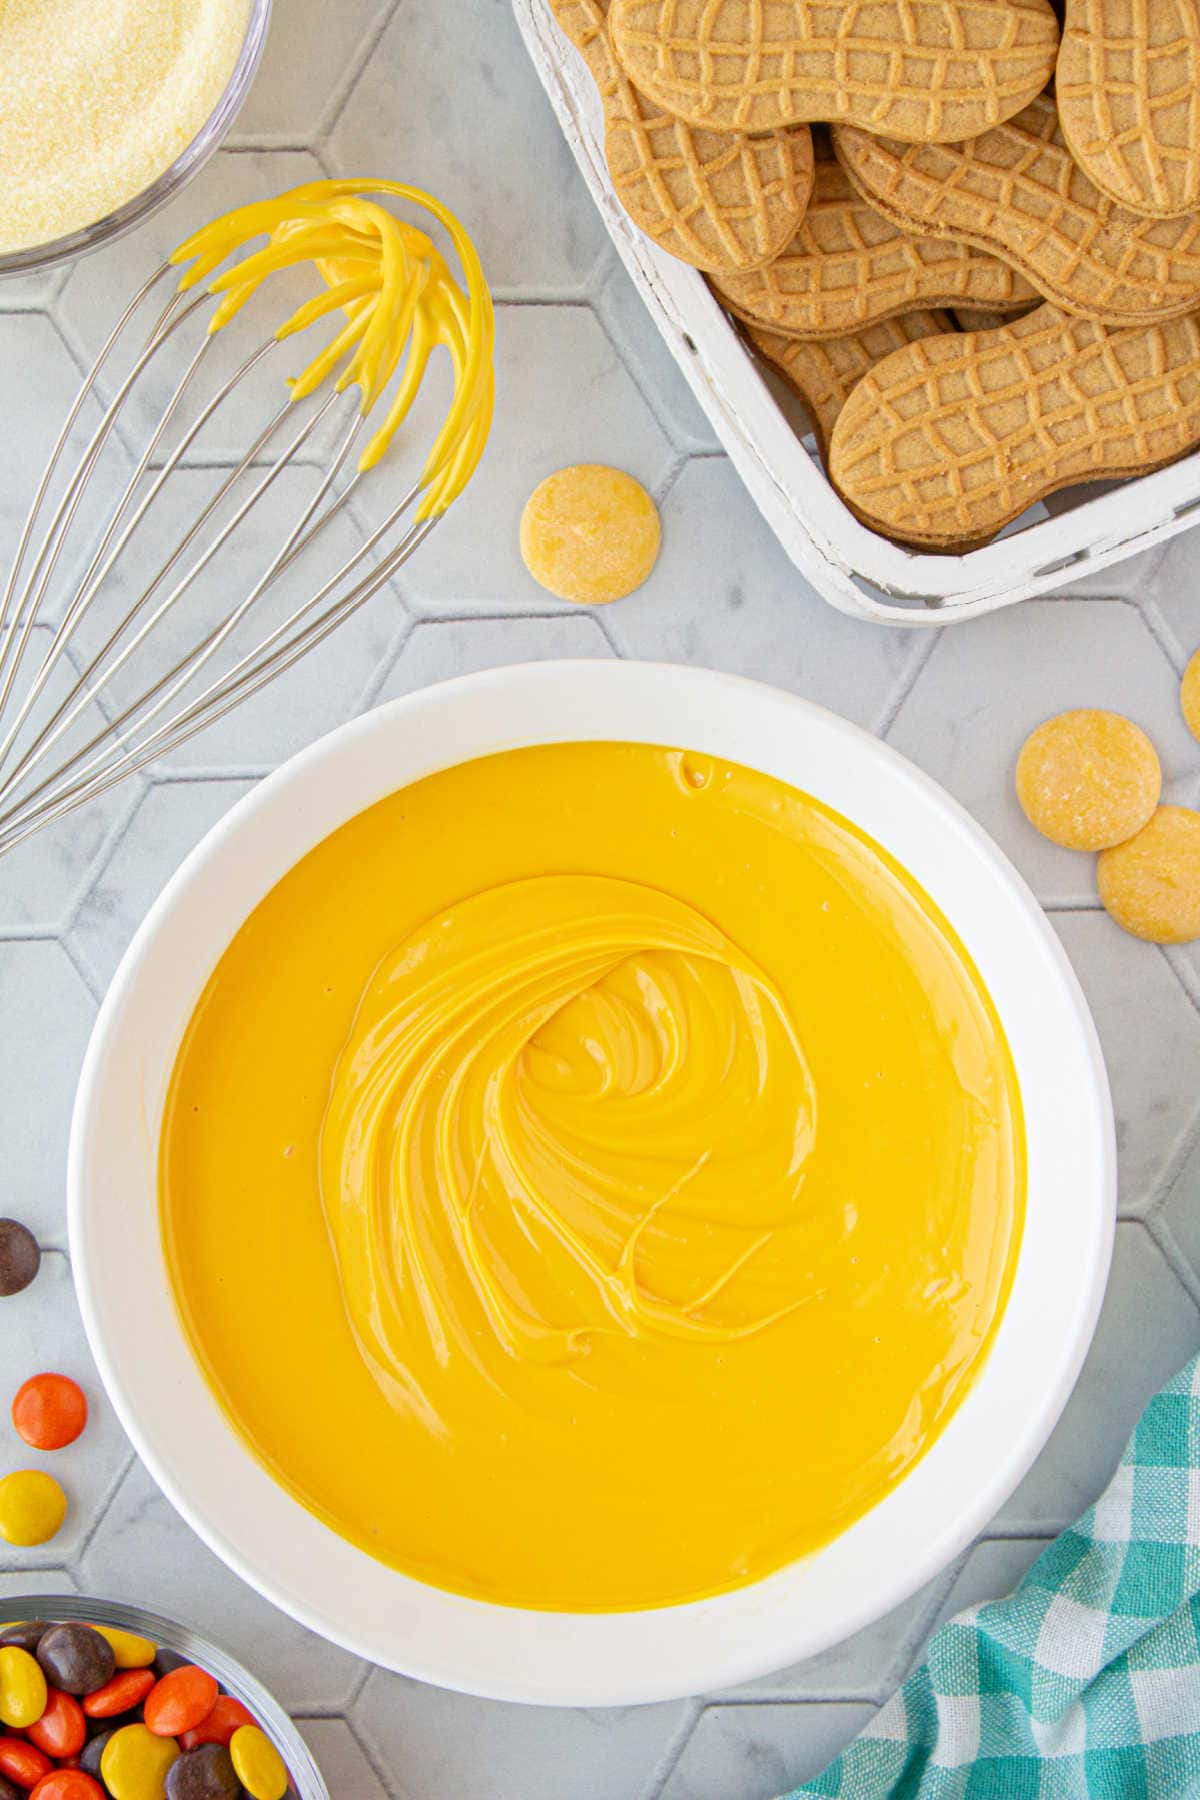 A bowl of yellow melted candy melts.